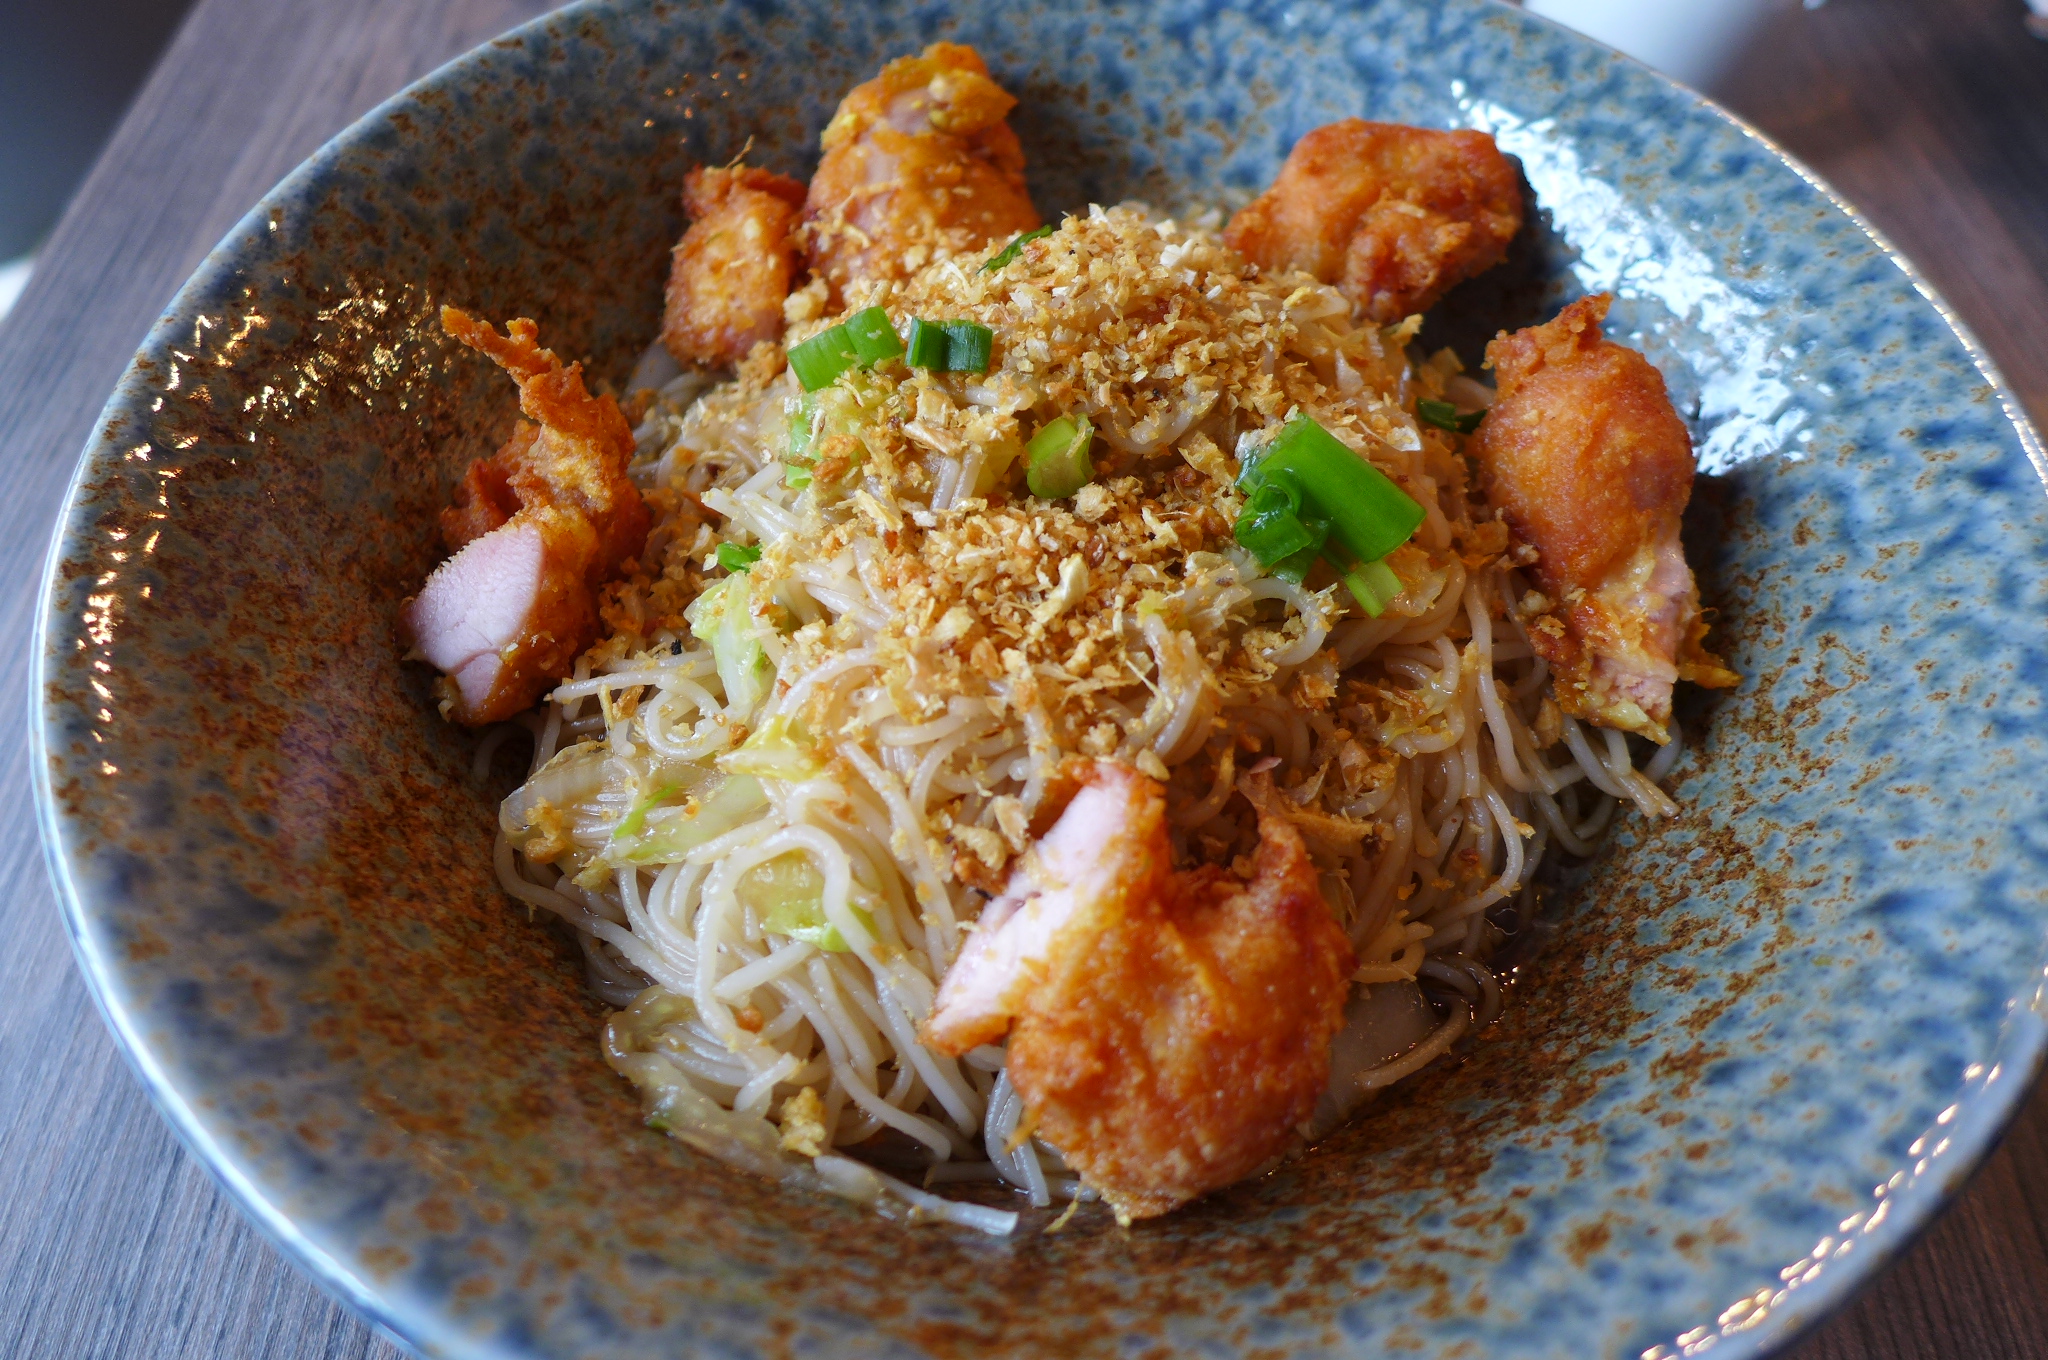 A nest of noodles with crunchy shallots and fried shrimp on top.